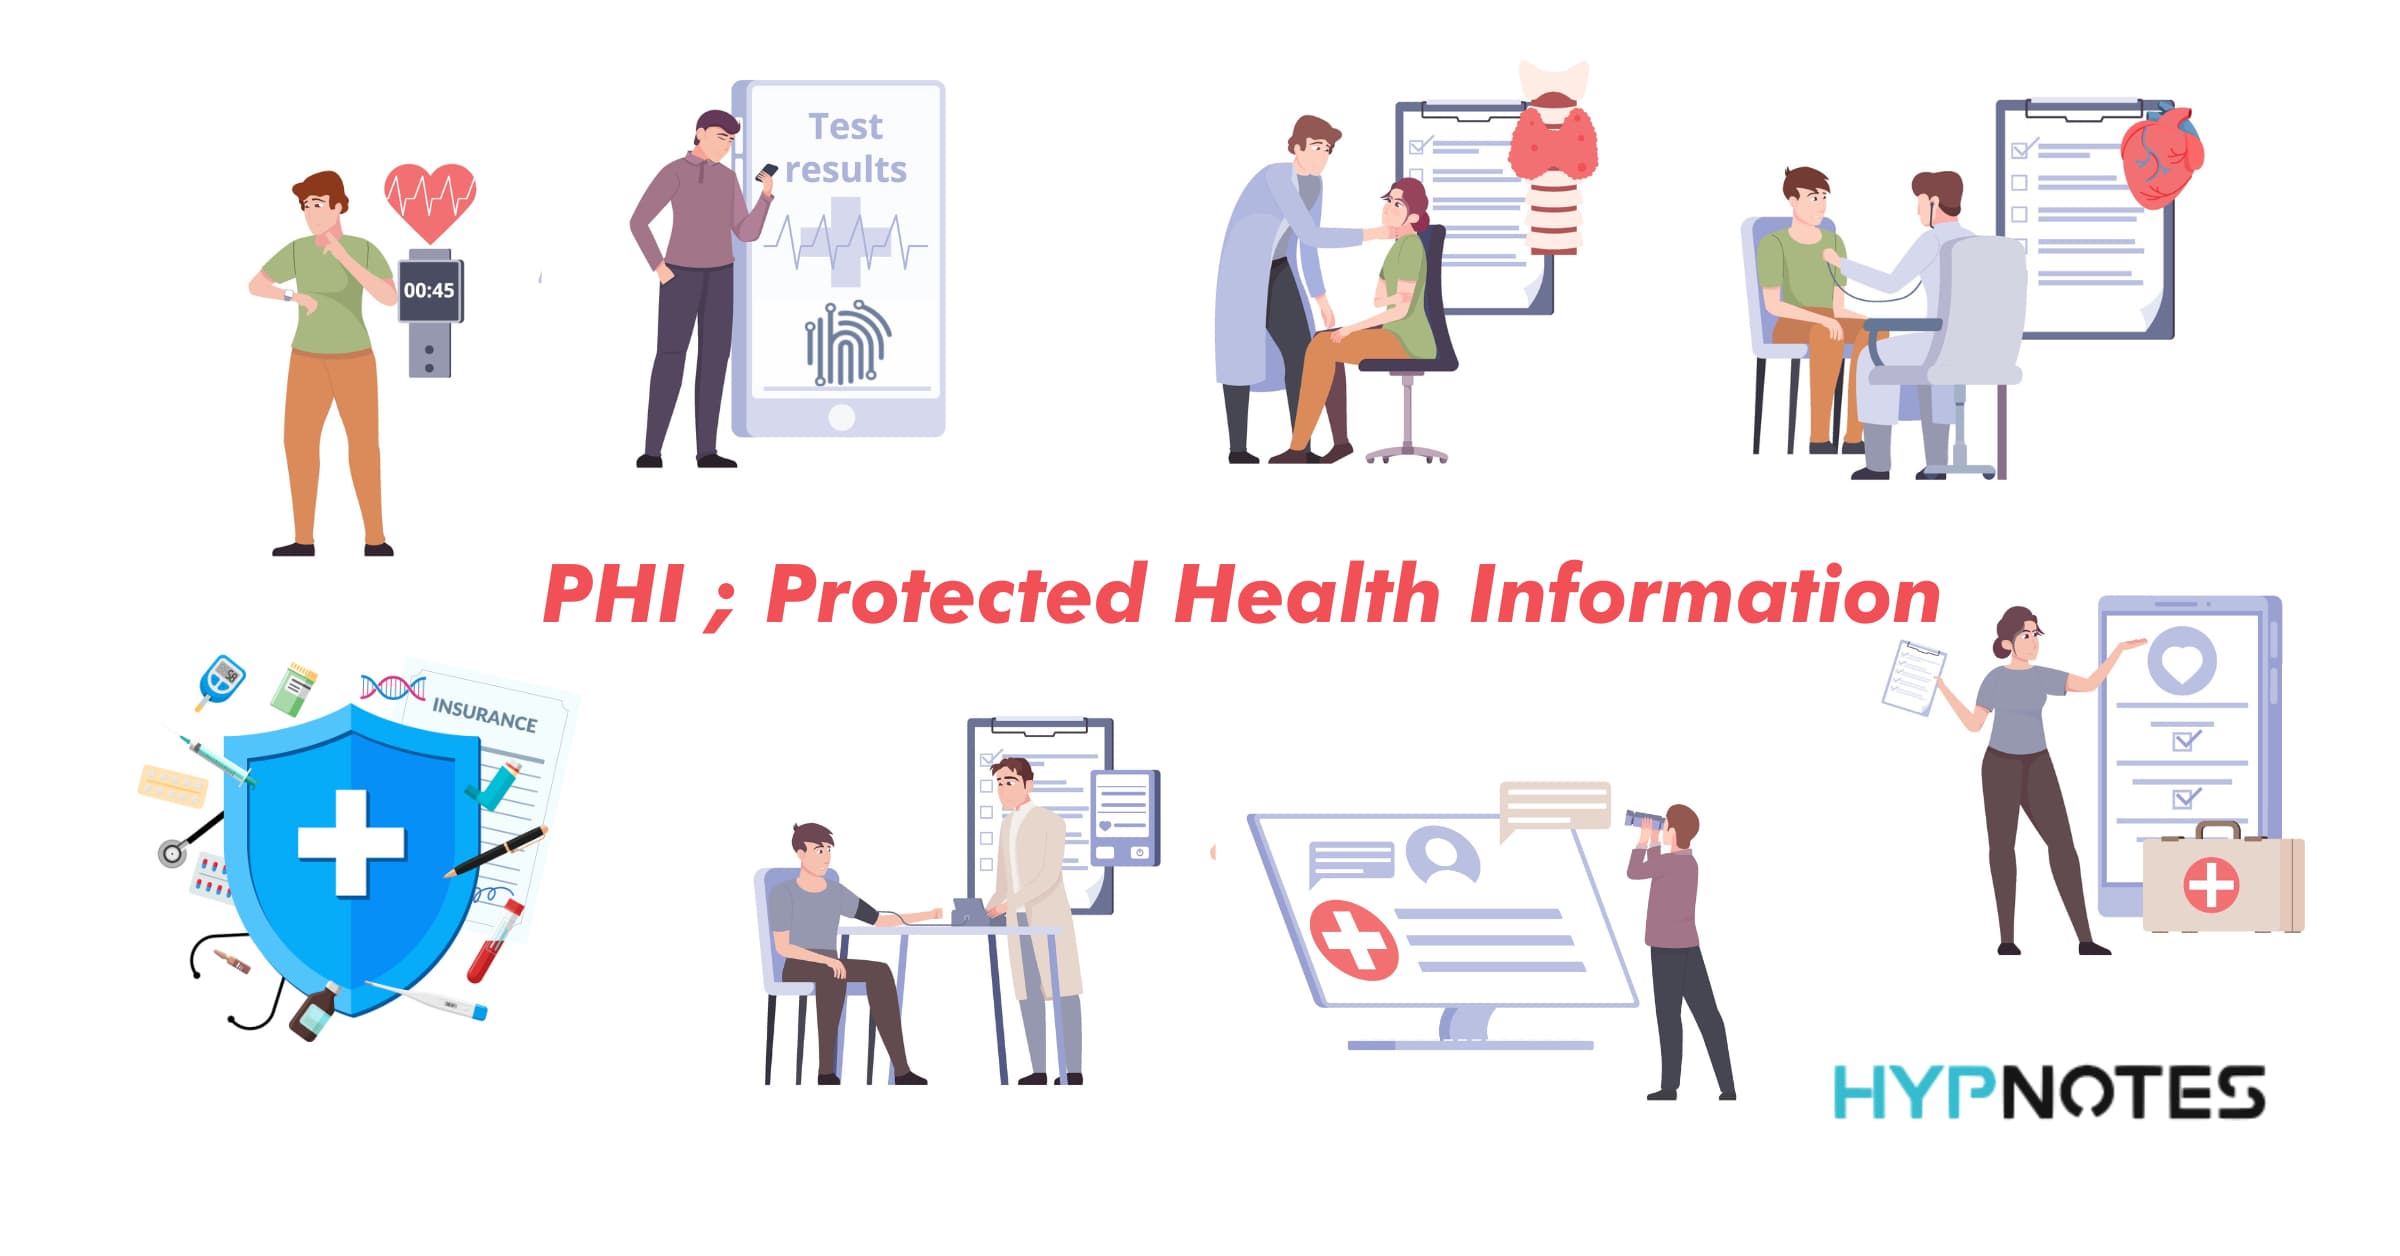 PHI-protected health information meaning image